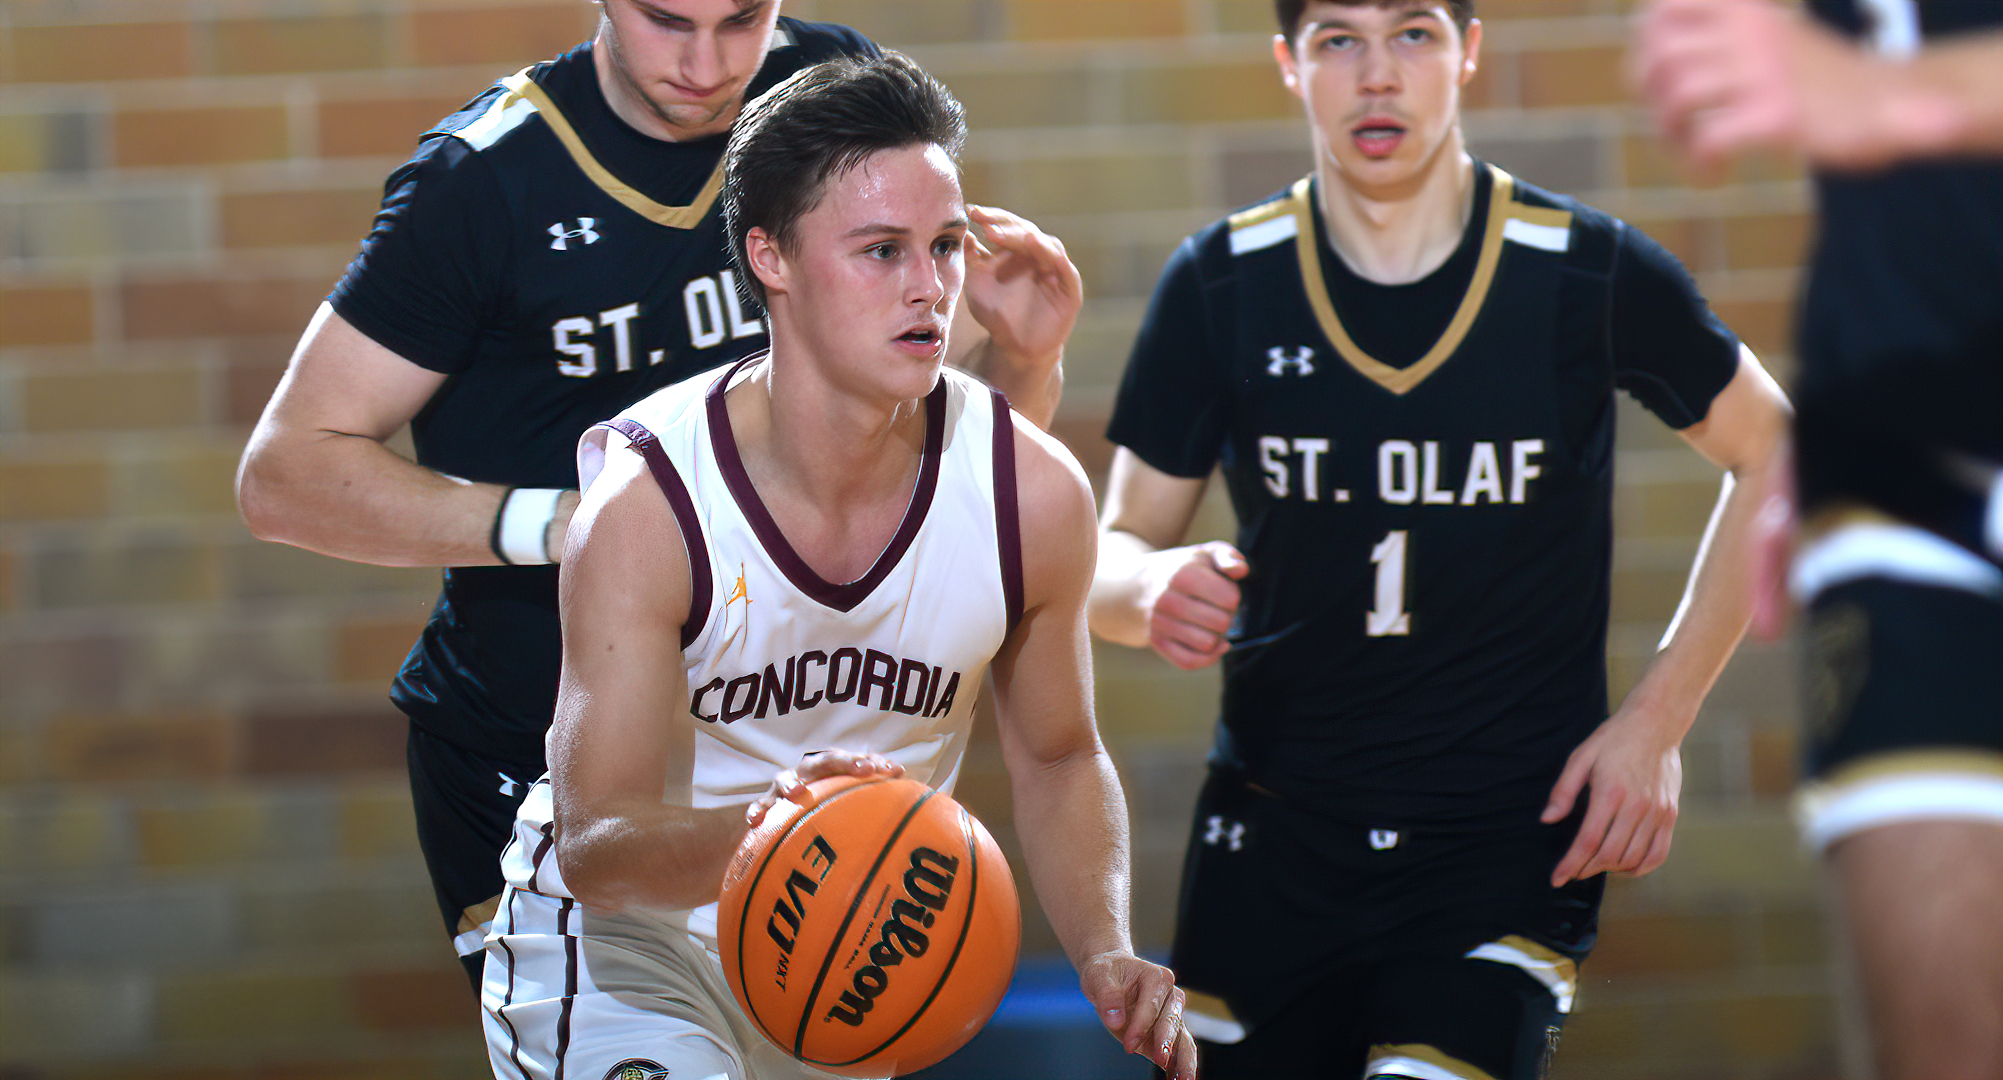 Jackson Jangula didn’t miss a shot in the Cobbers' game at St. Olaf. He went 7-for-7 from the floor, 2-for-2 from distance and 1-for-1 from FT.